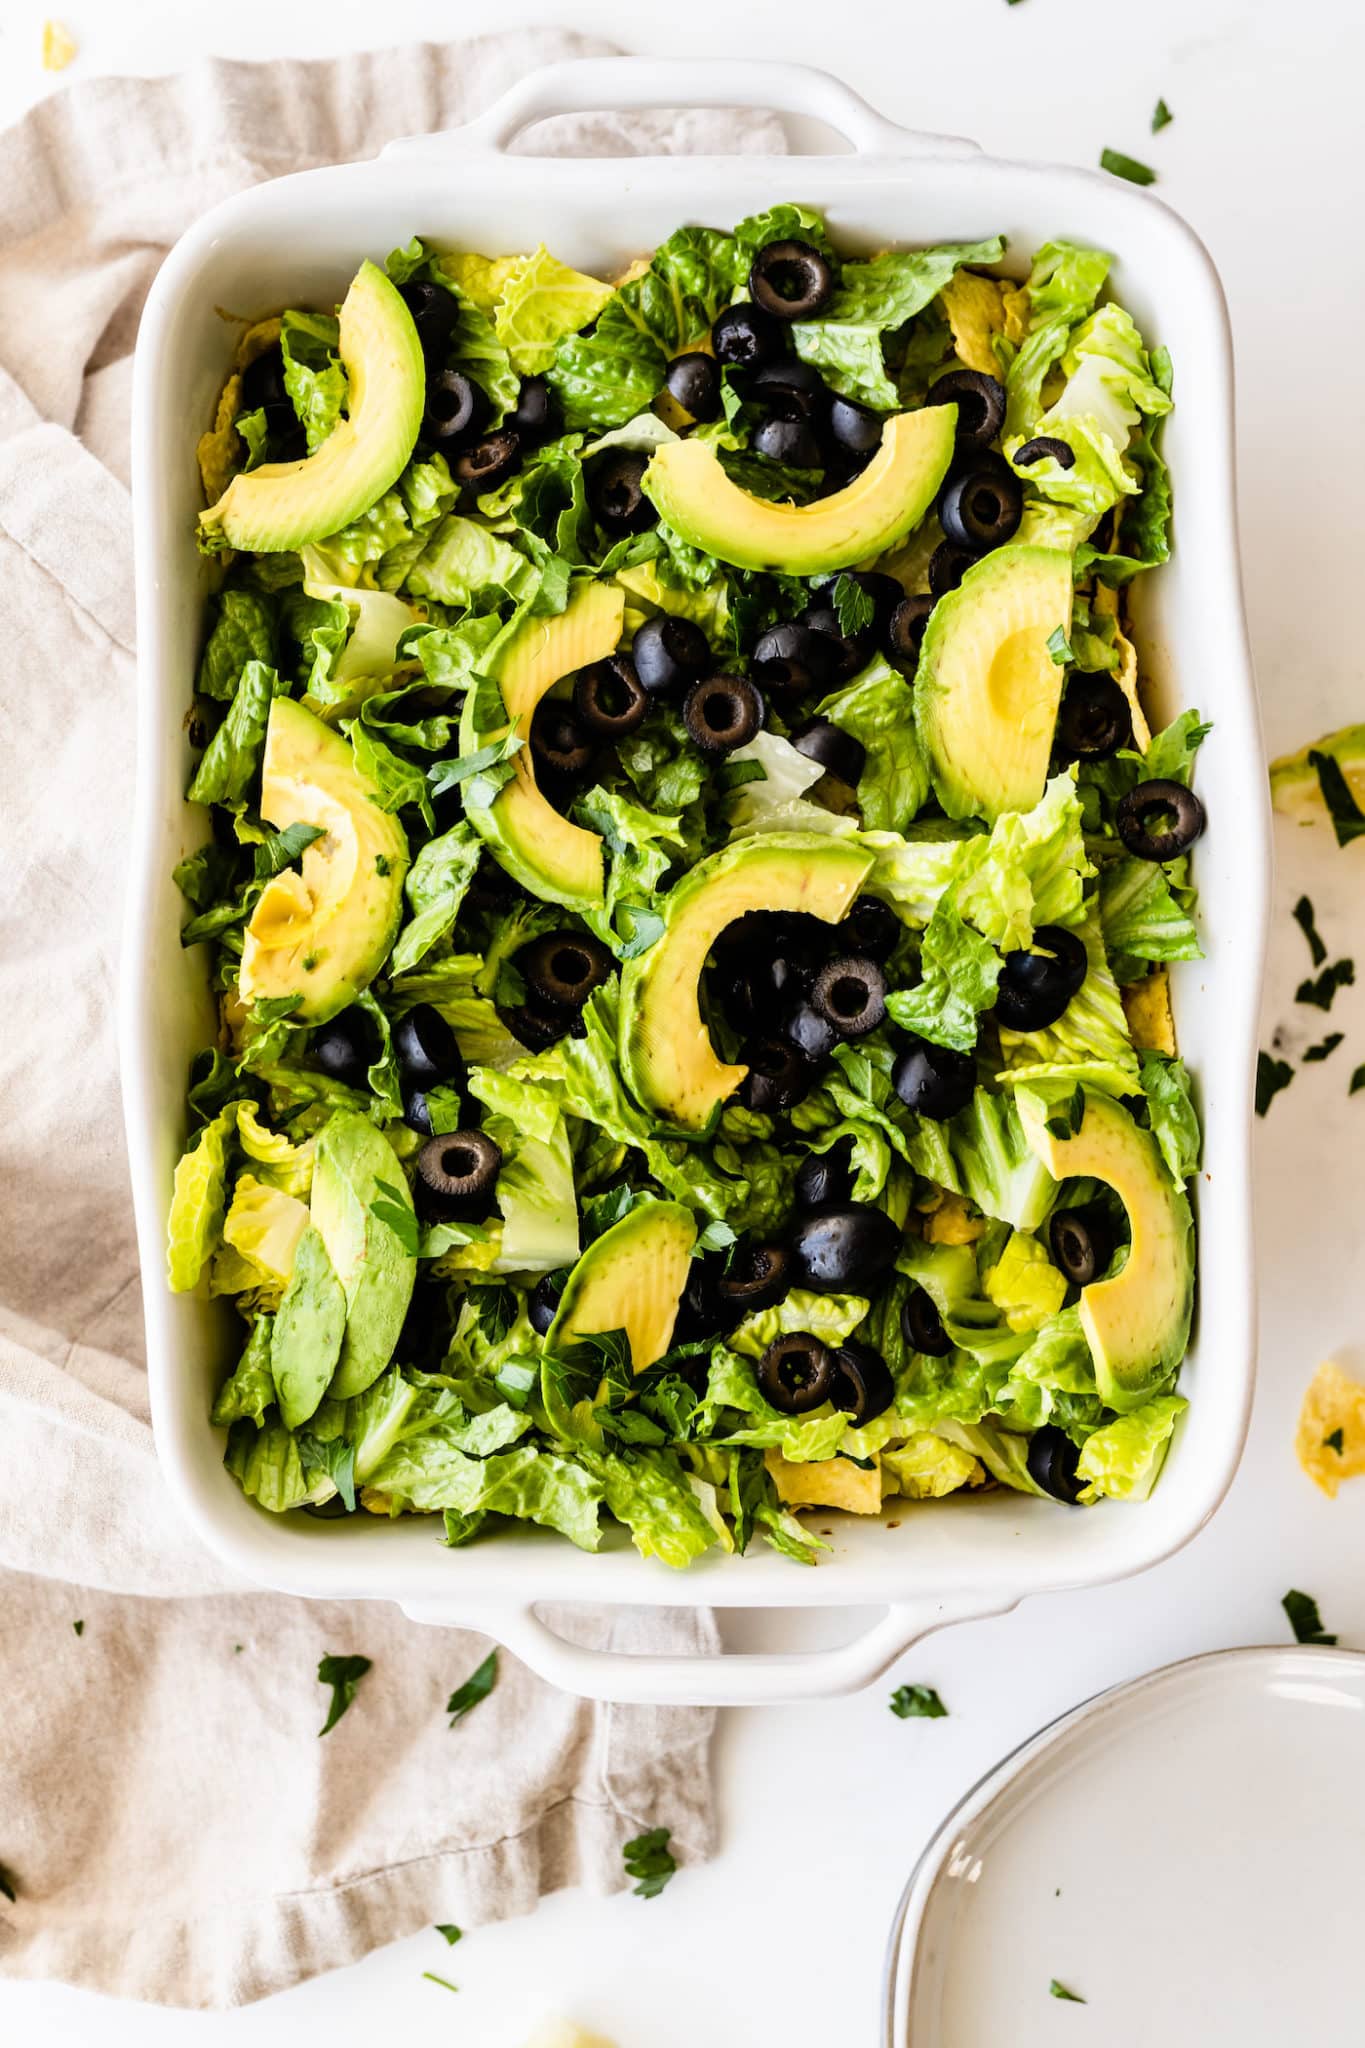 Vegan taco casserole with lettuce, olives, and avocado